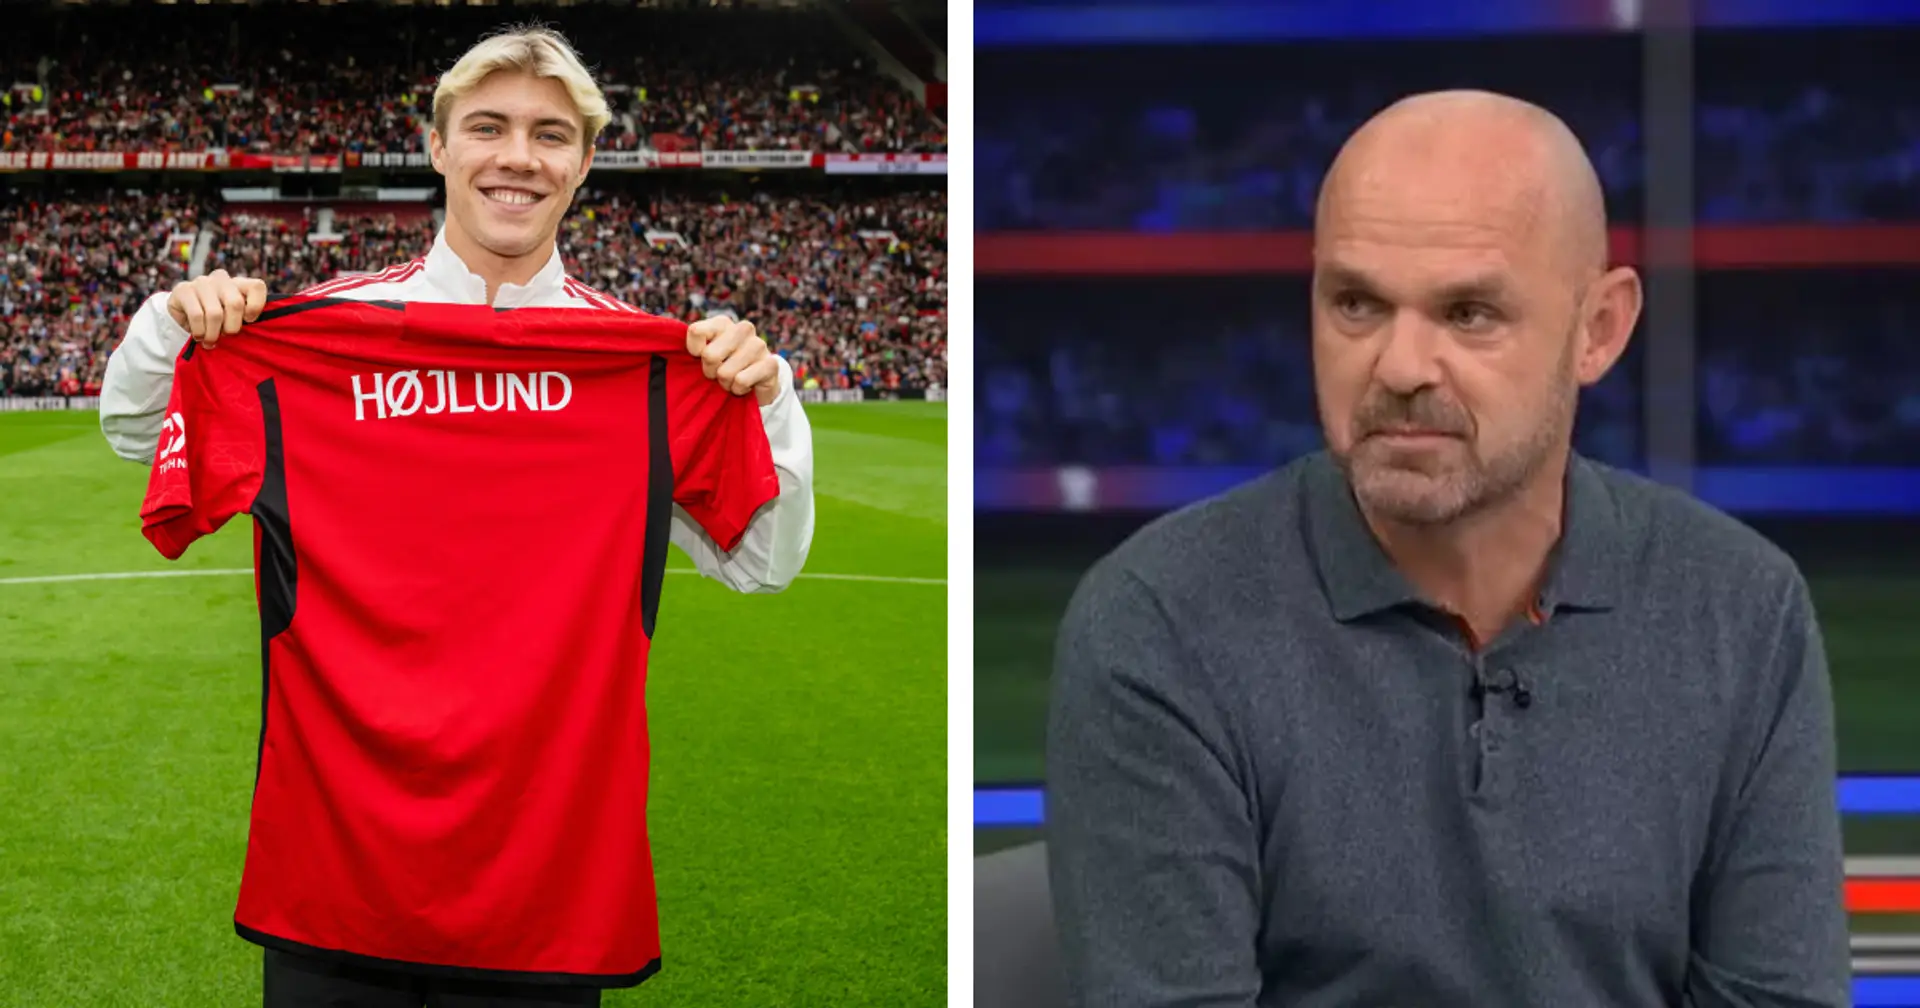 'Hojlund makes them better': Danny Murphy expects Man United to improve once new striker is fit